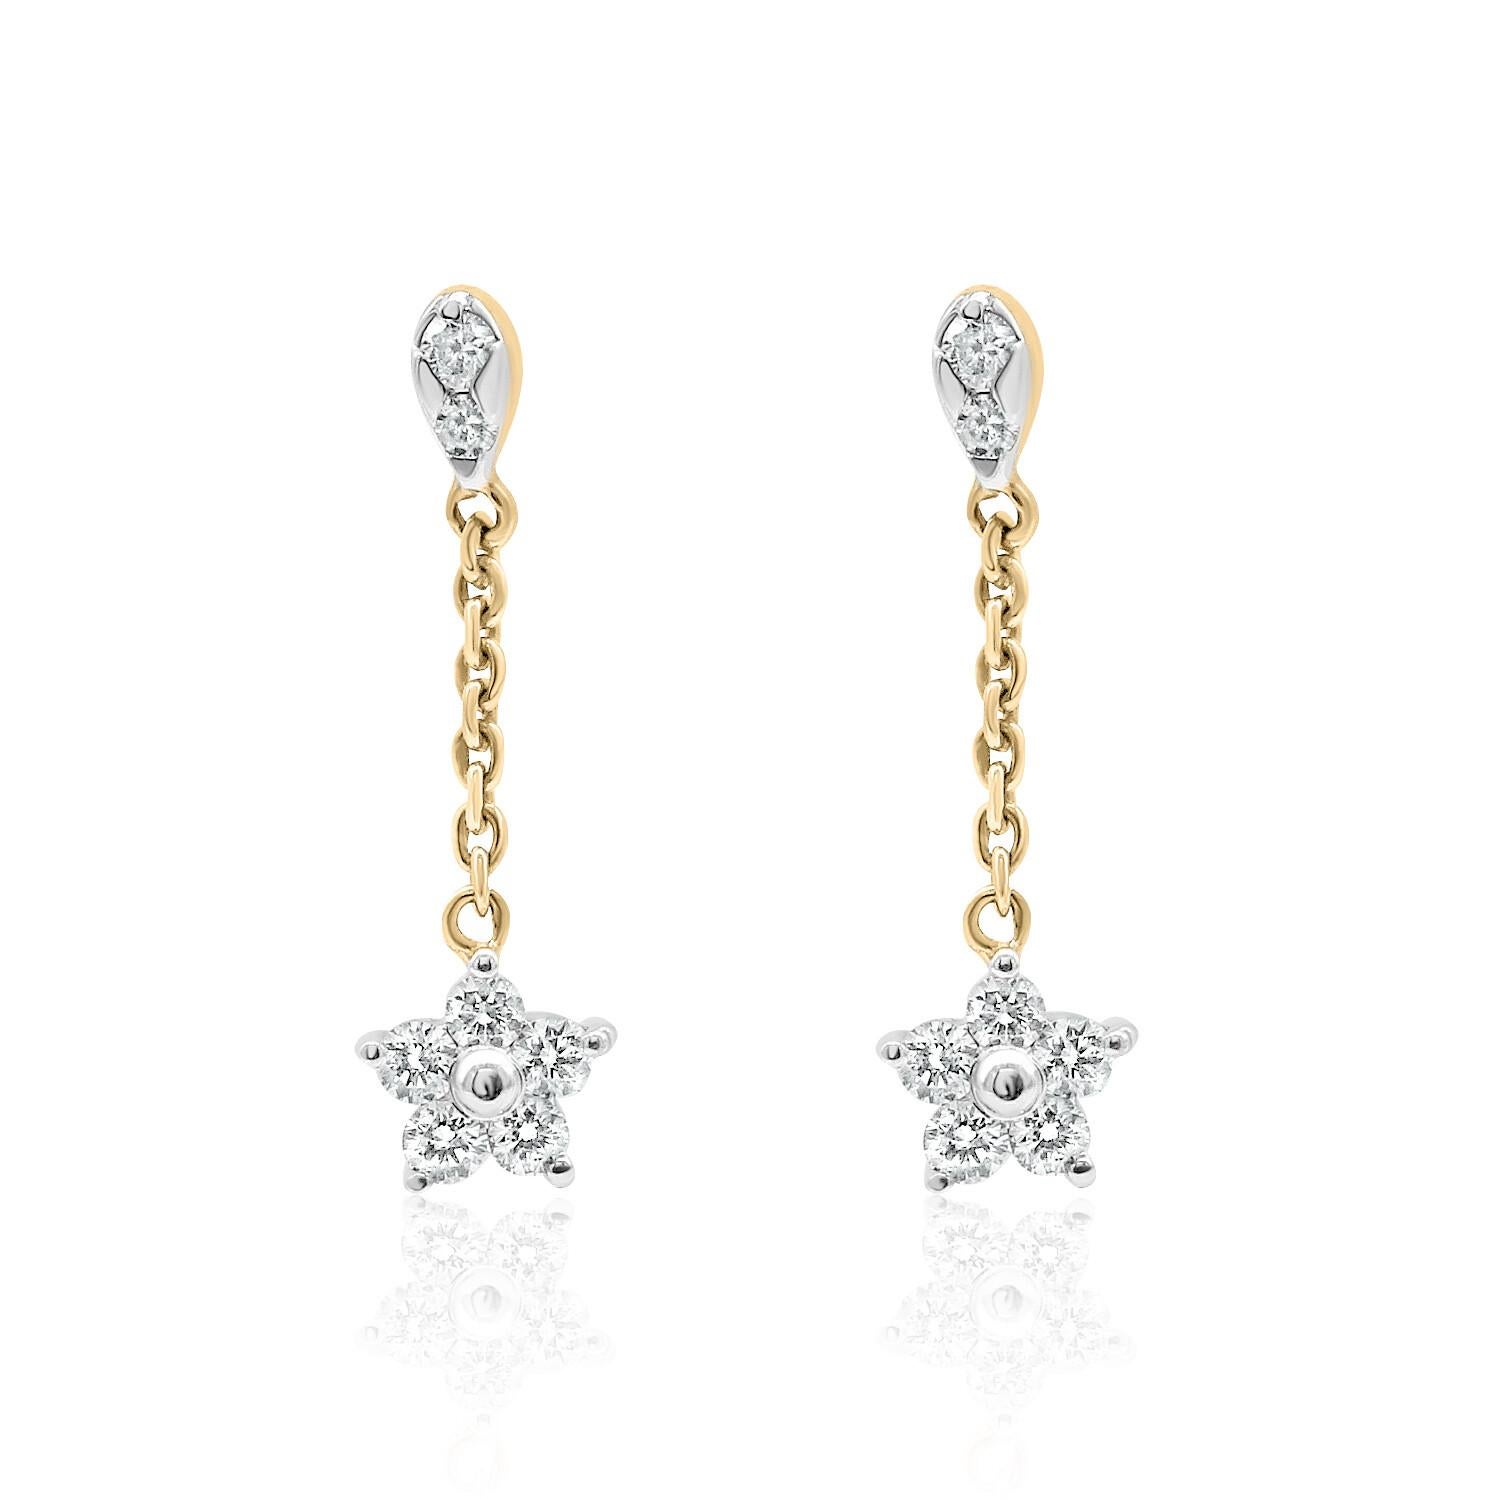 Splendid Dangling Star Diamond Earrings, featuring:
✧ 14 natural earth mined diamonds G-H color VS-SI weighing 0.22 carats 
✧ Measurements: 16.5mm
✧ Available in 14K White, Yellow, and Rose Gold
✧ Push back friction closure
✧ Free appraisal included